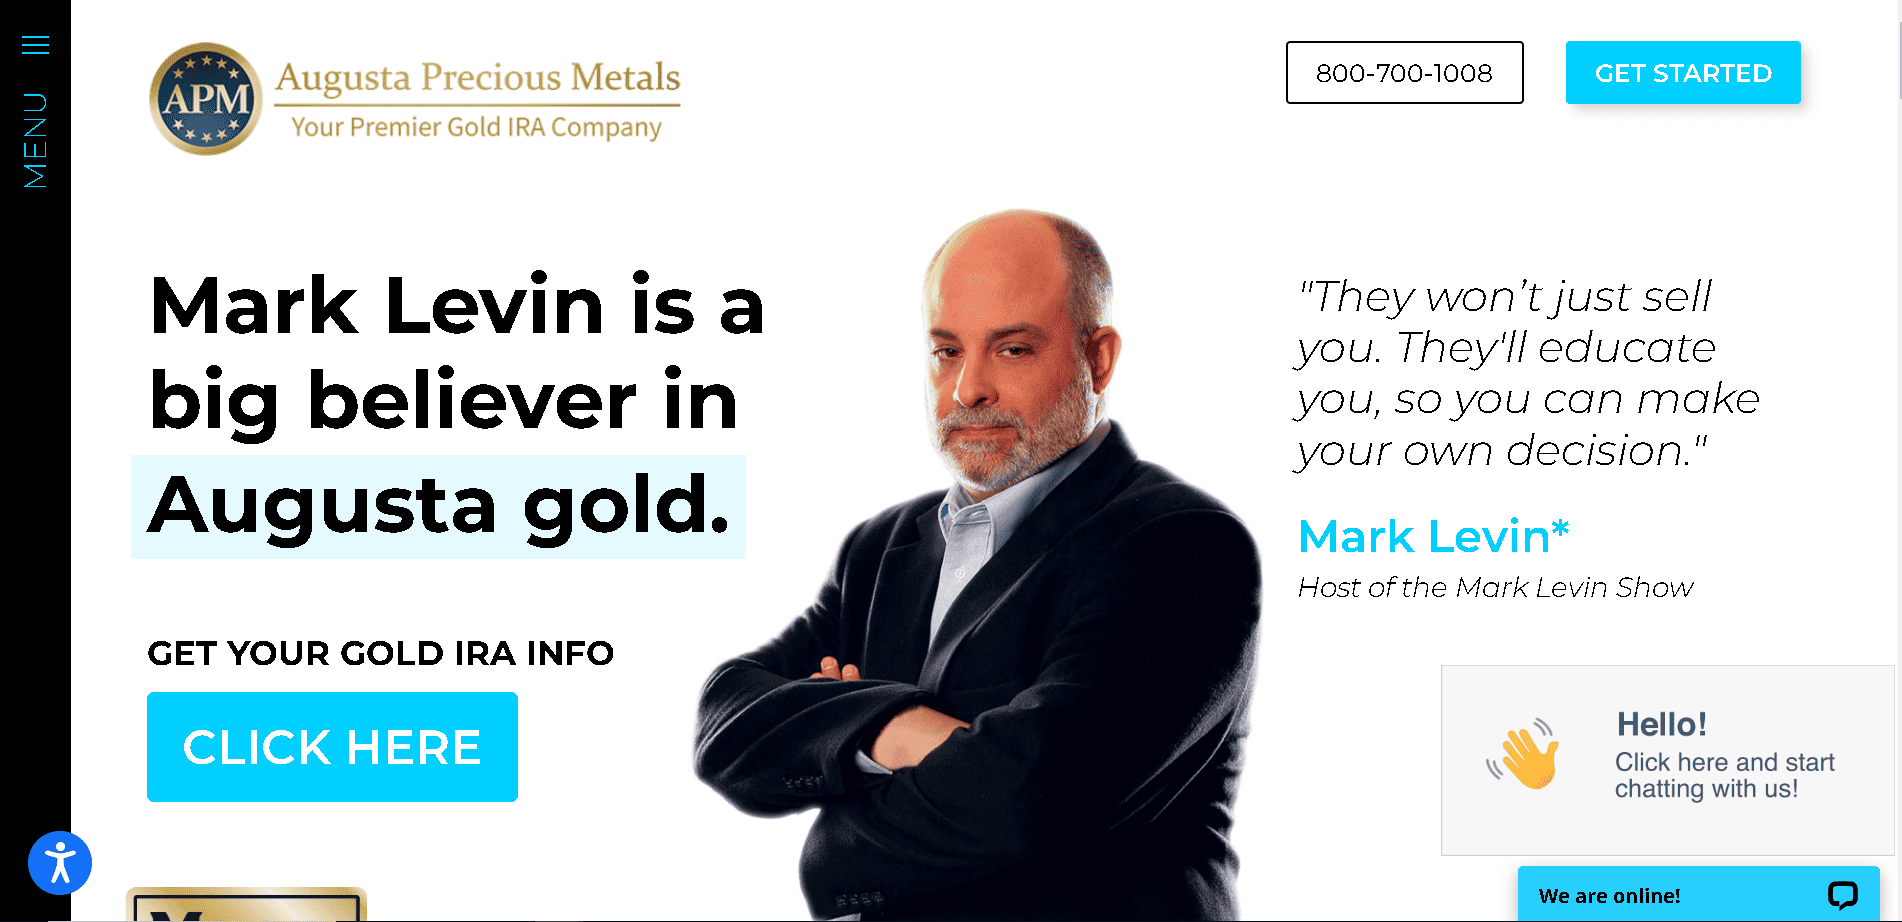 What is Augusta Precious Metals?